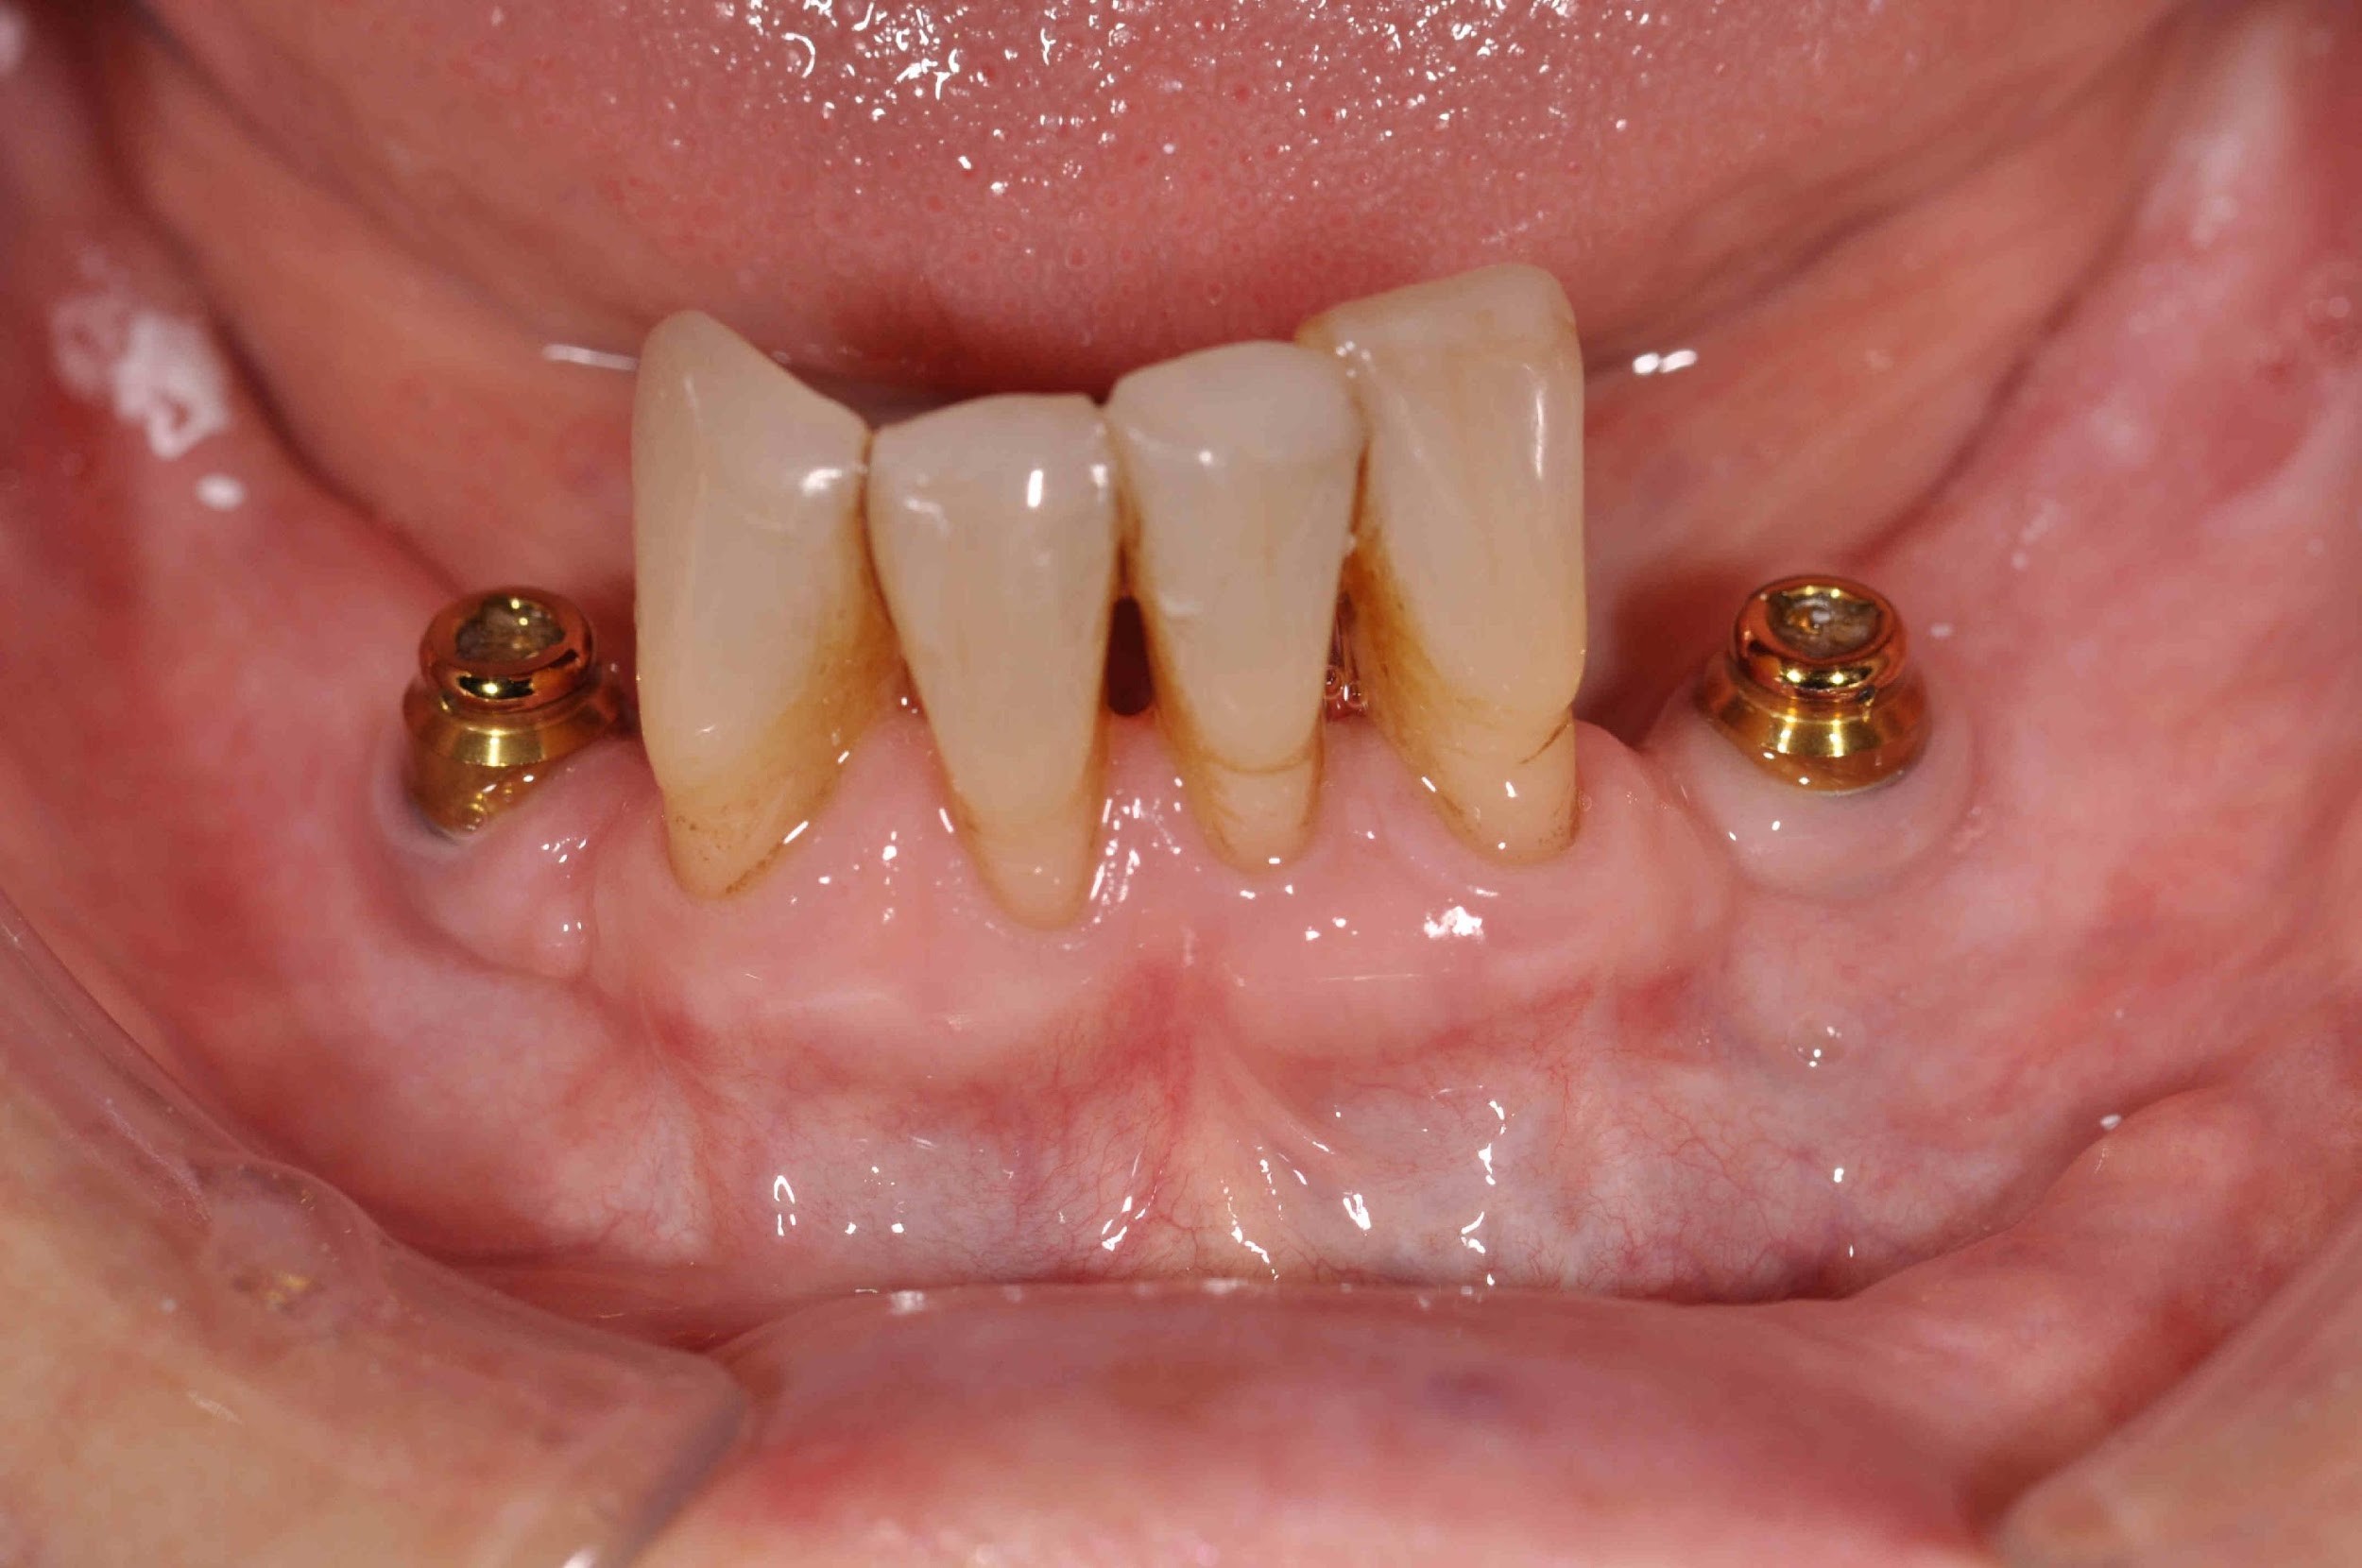 Healthy periodontal and peri-implant tissues, excellent oral hygiene and adequate space around the locator abutments for the locator housing and retaining acrylic